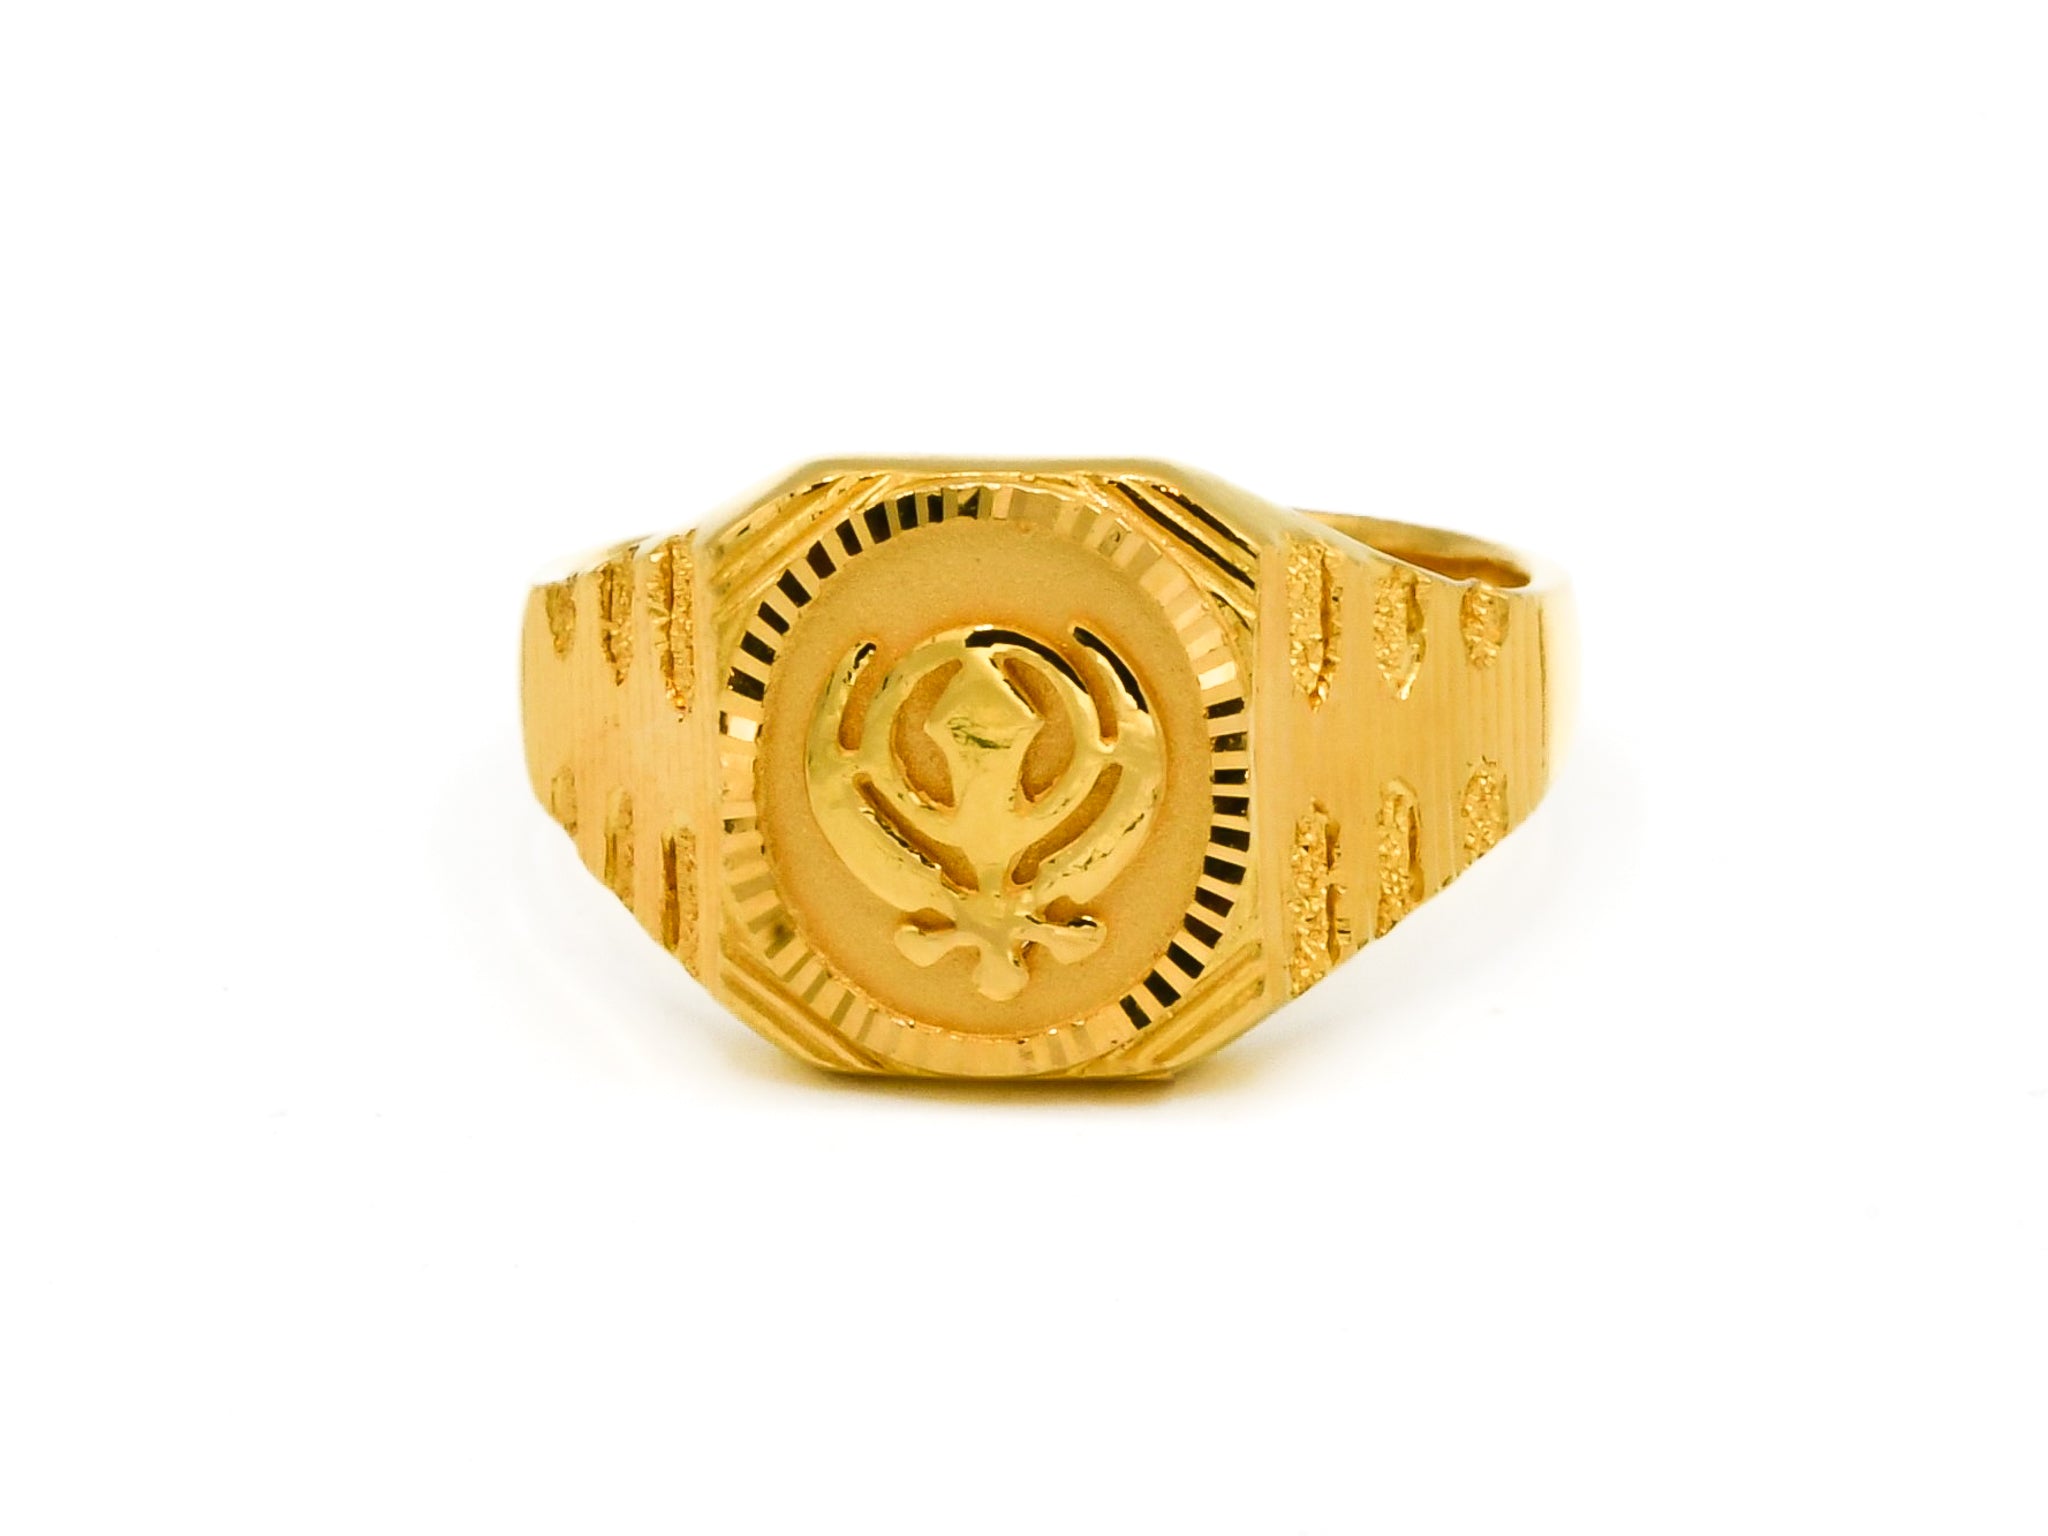 MENS FANCY RING FEATURING LASER CUT AND BRUSH FINISHING - 22K YELLOW GOLD